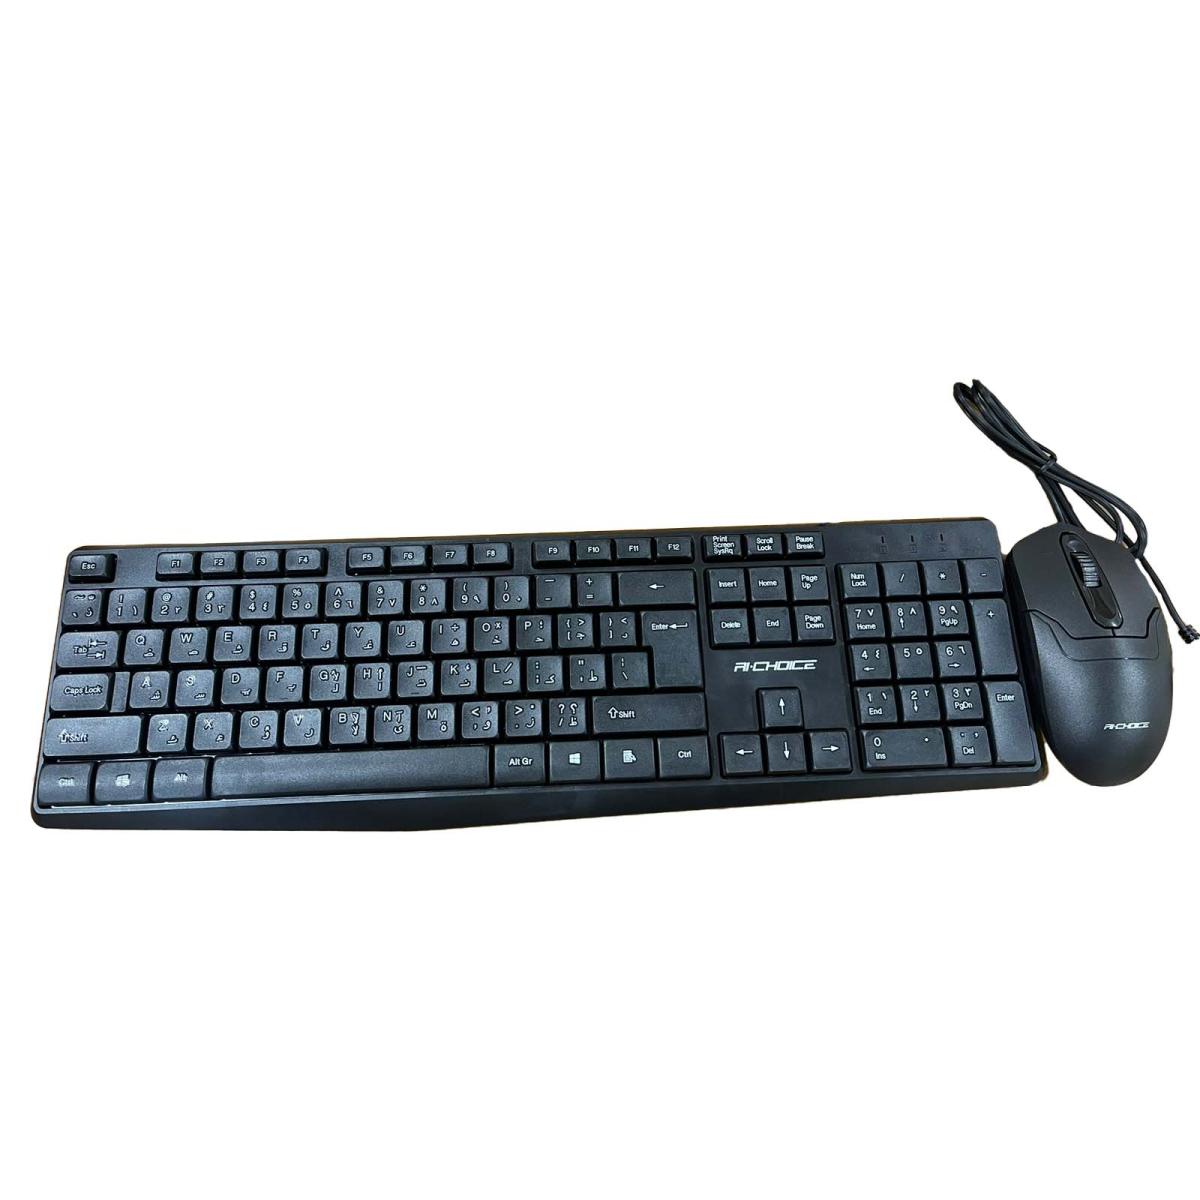 Ri-choice KM1000 Wired Keyboard and Mouse Combo